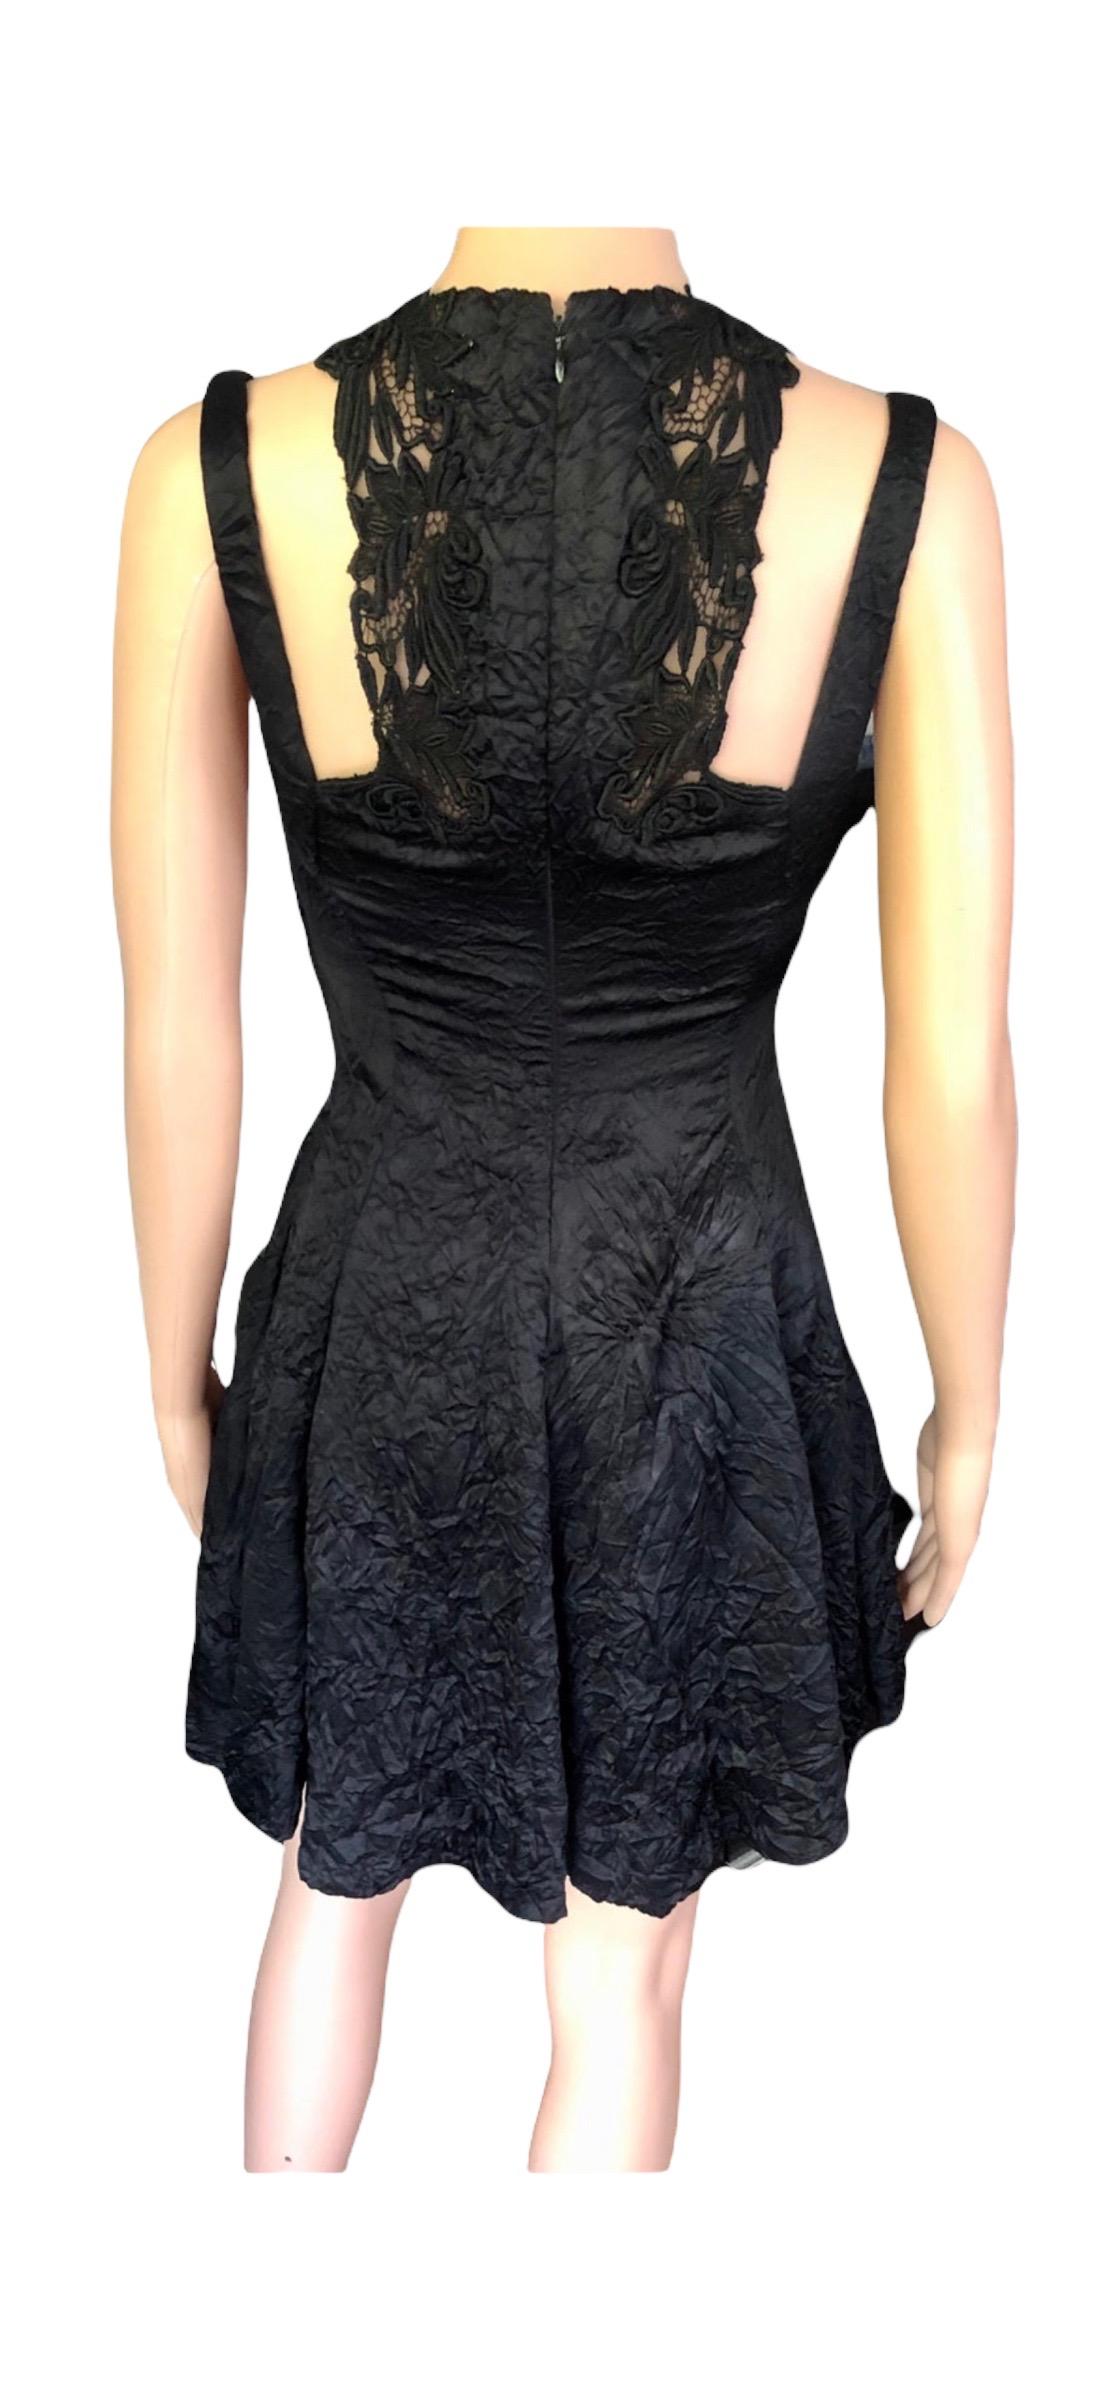 Gianni Versace S/S 1994 Runway Couture Vintage Crinkle Silk Lace Black Dress For Sale 10